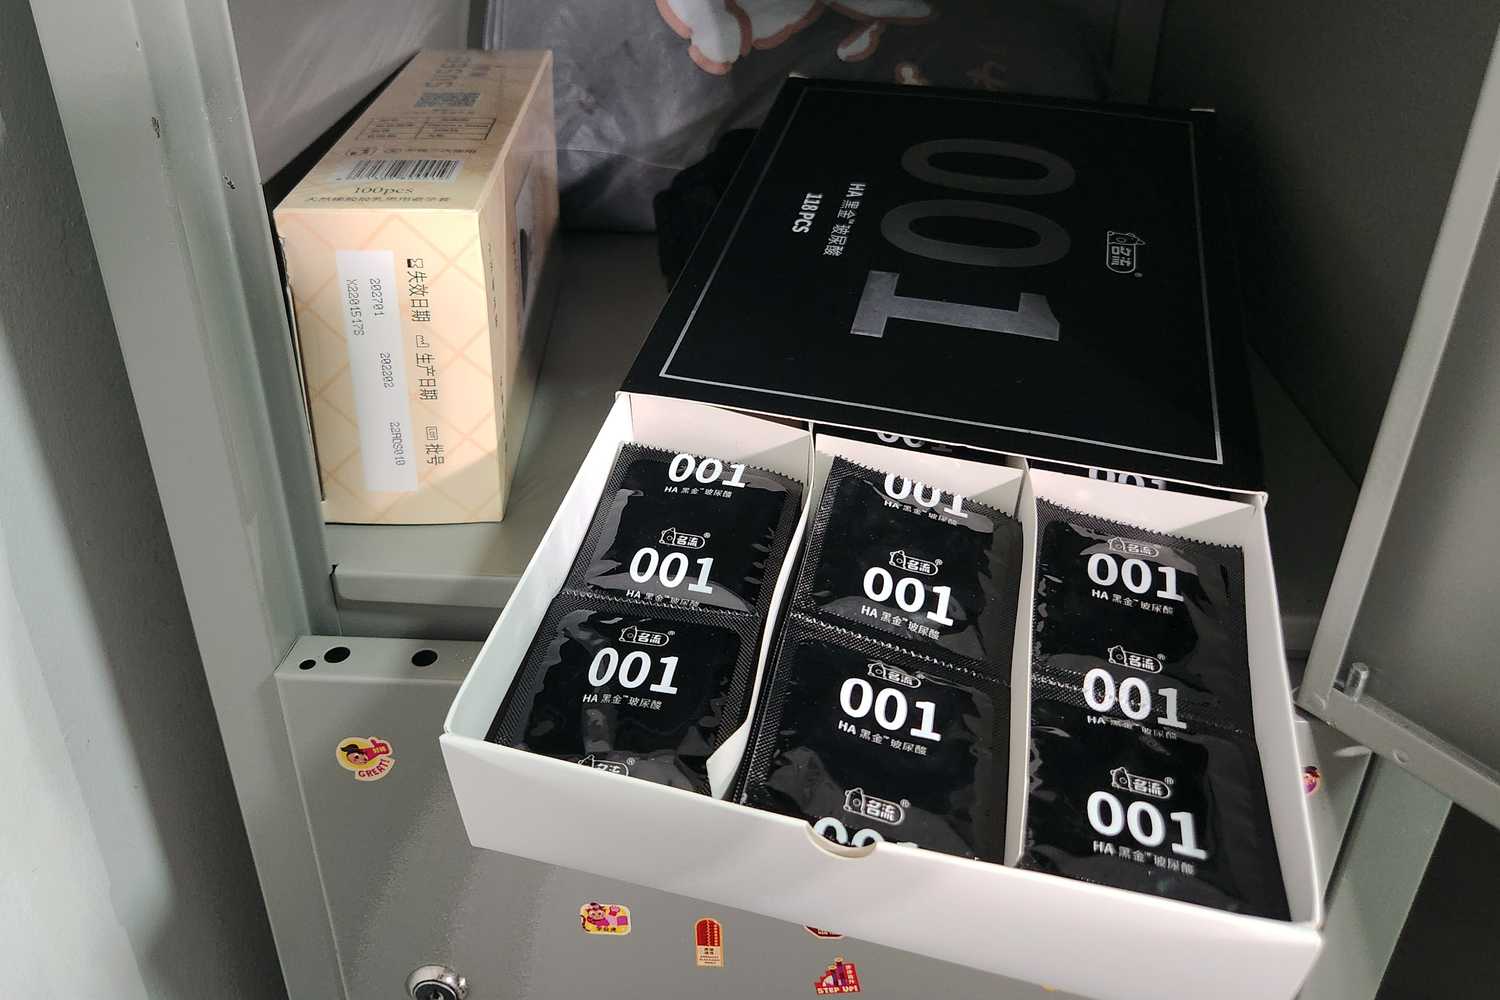 a photo of inside a staff's locker showing a box of condoms that are black and white covered with "001" brand printed on it